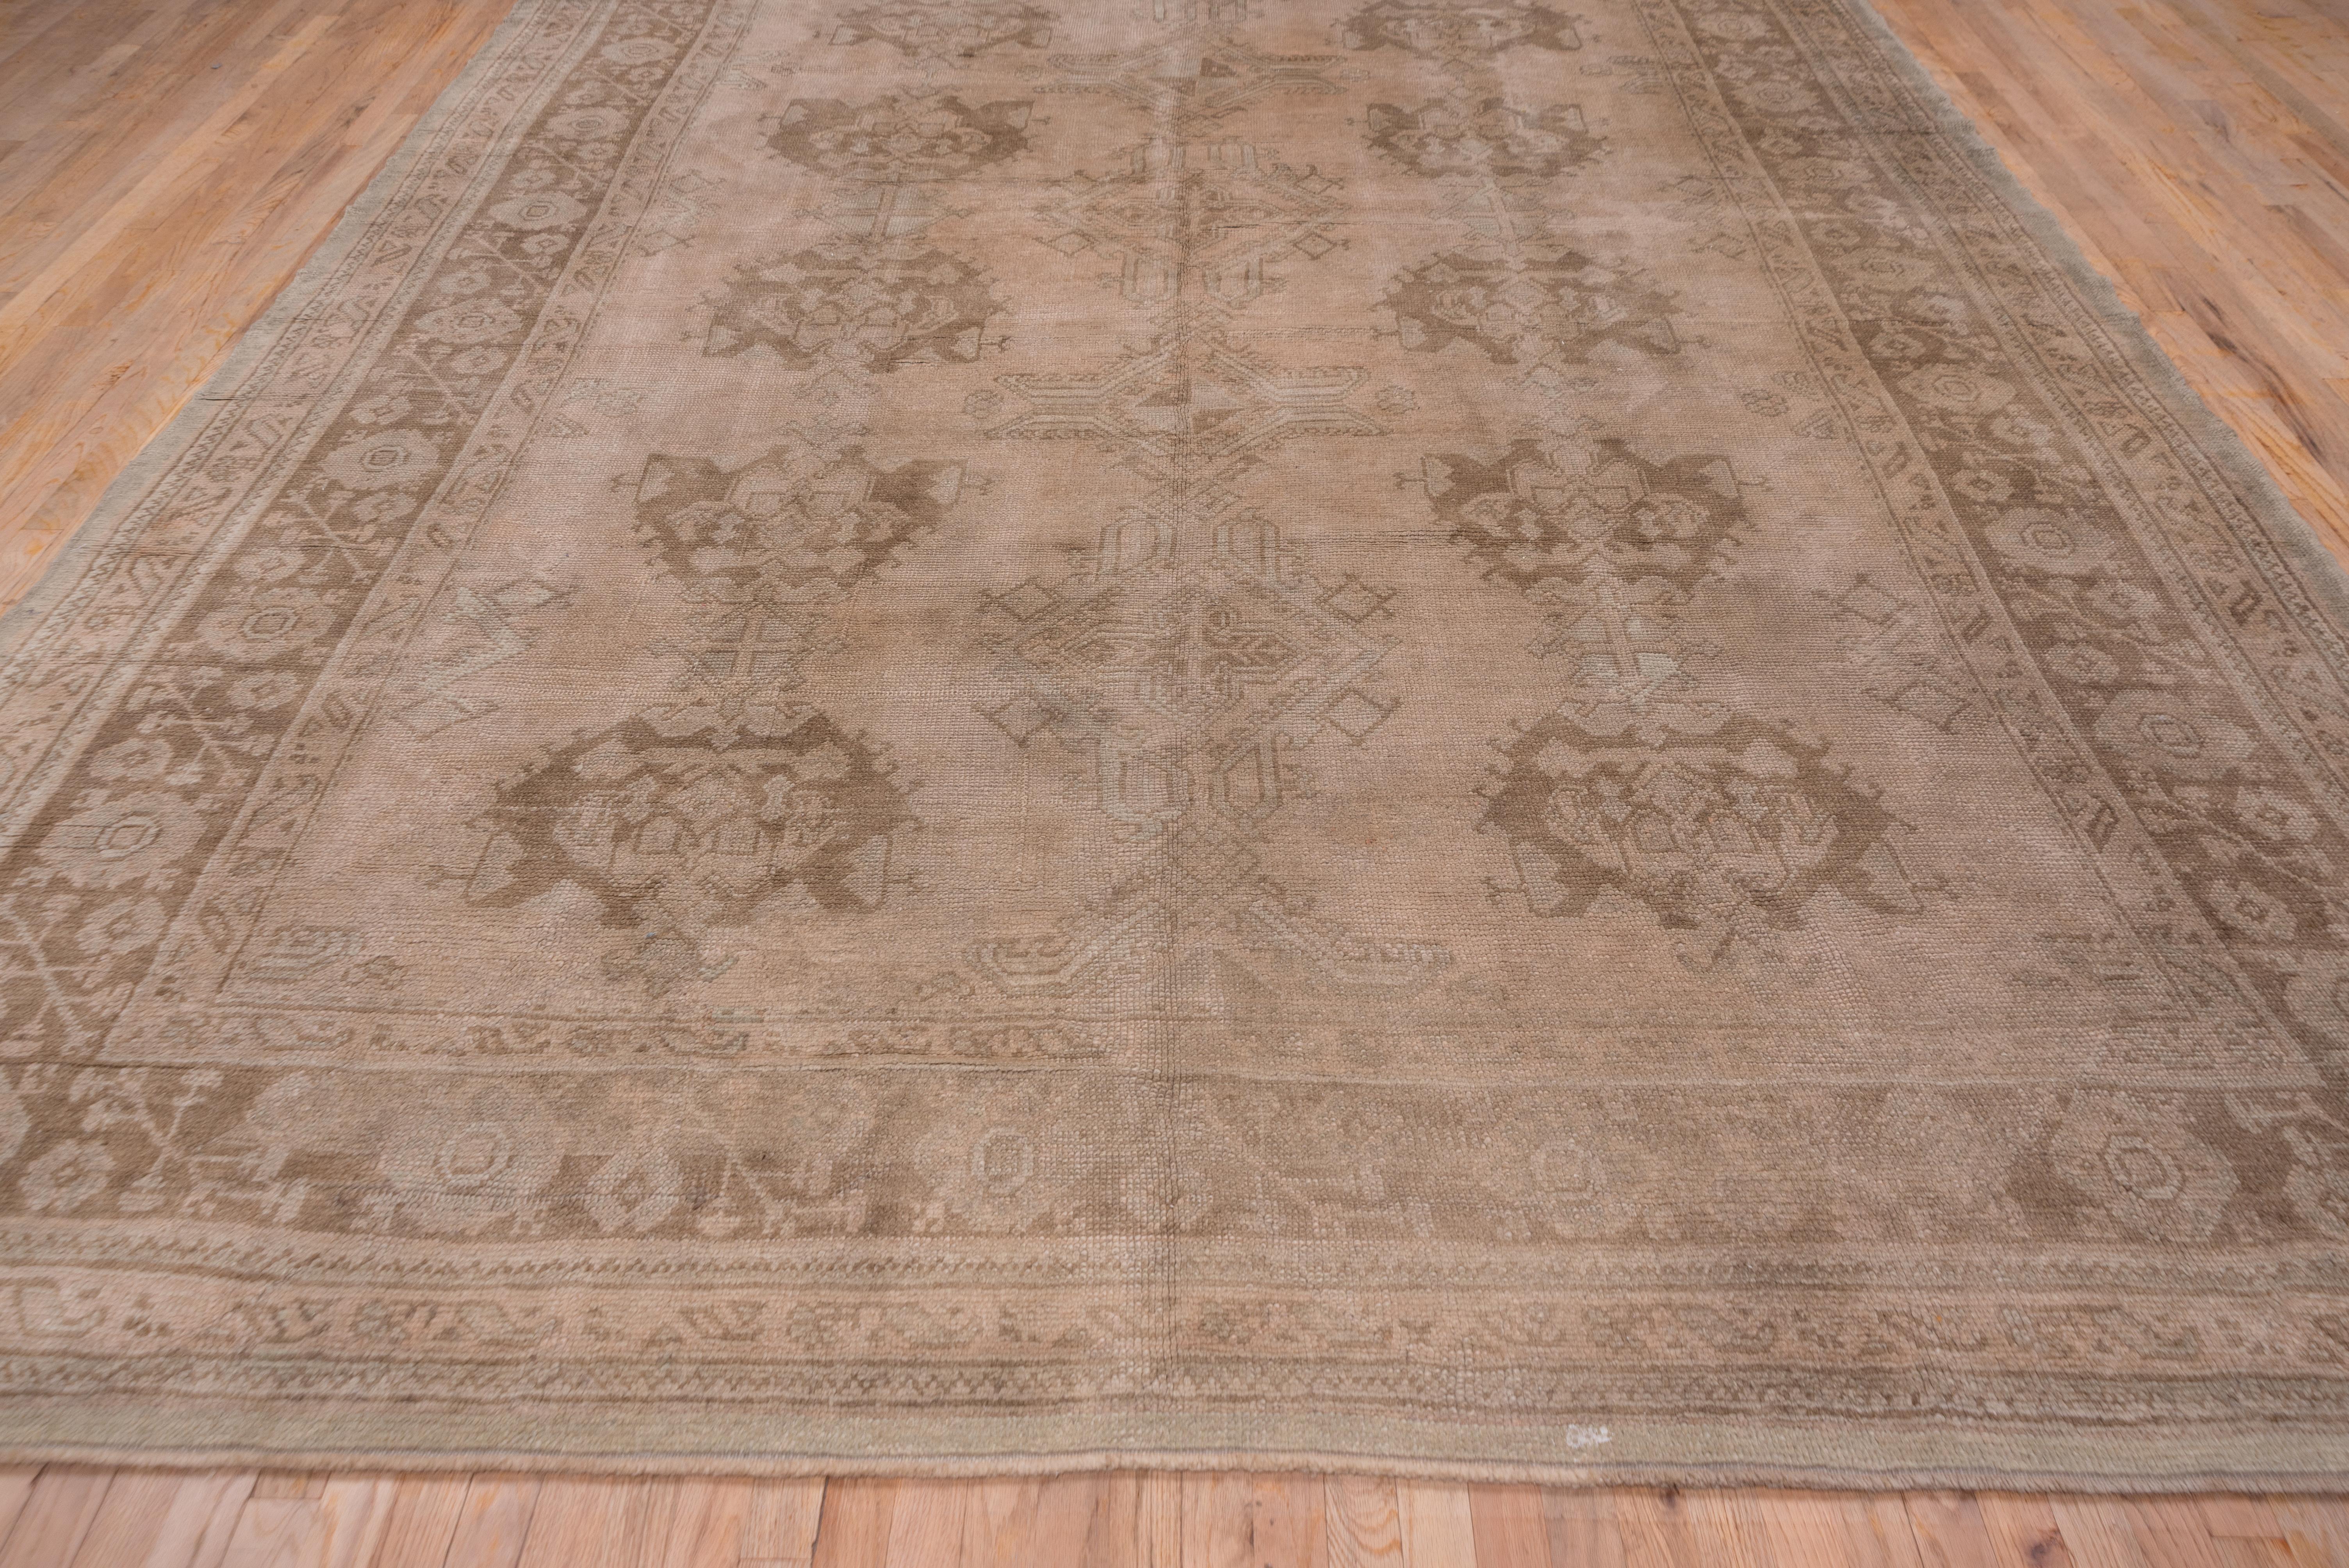 Neutral Antique Turkish Oushak Carpet In Good Condition For Sale In New York, NY